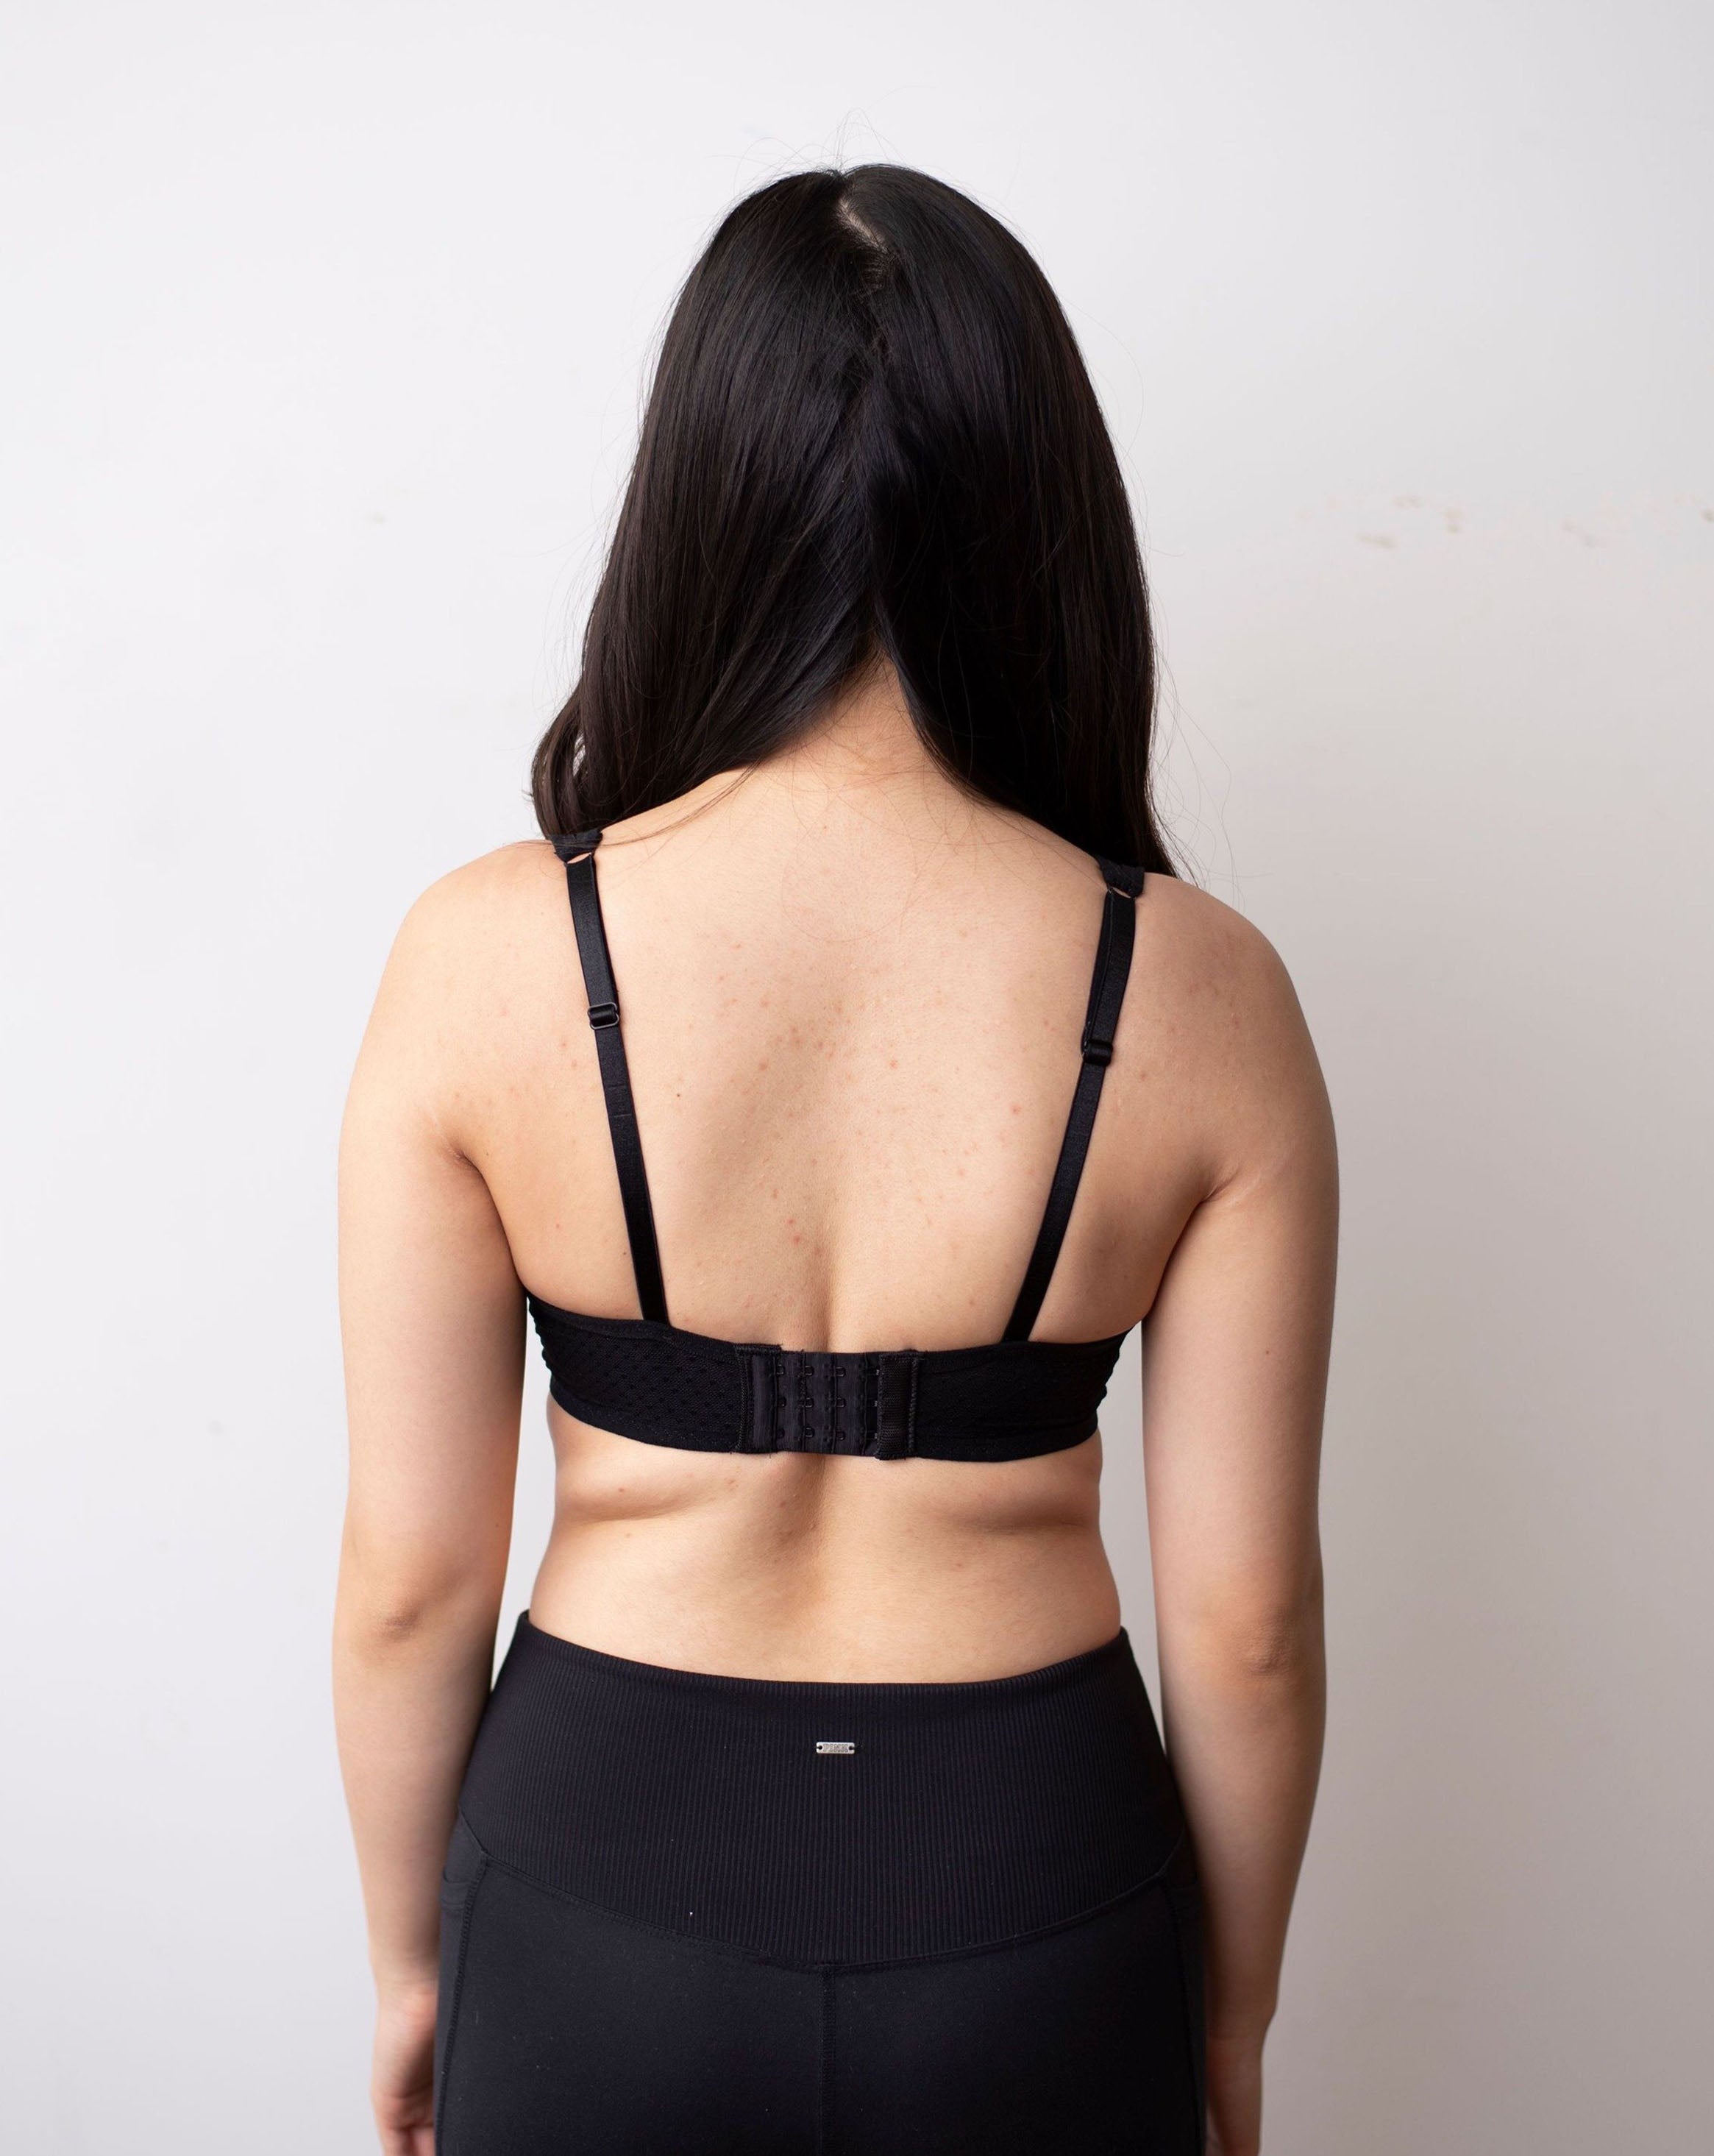 Half body back shot of female with long back hair against a white backdrop. Wearing a black, dotted, plunge bra.